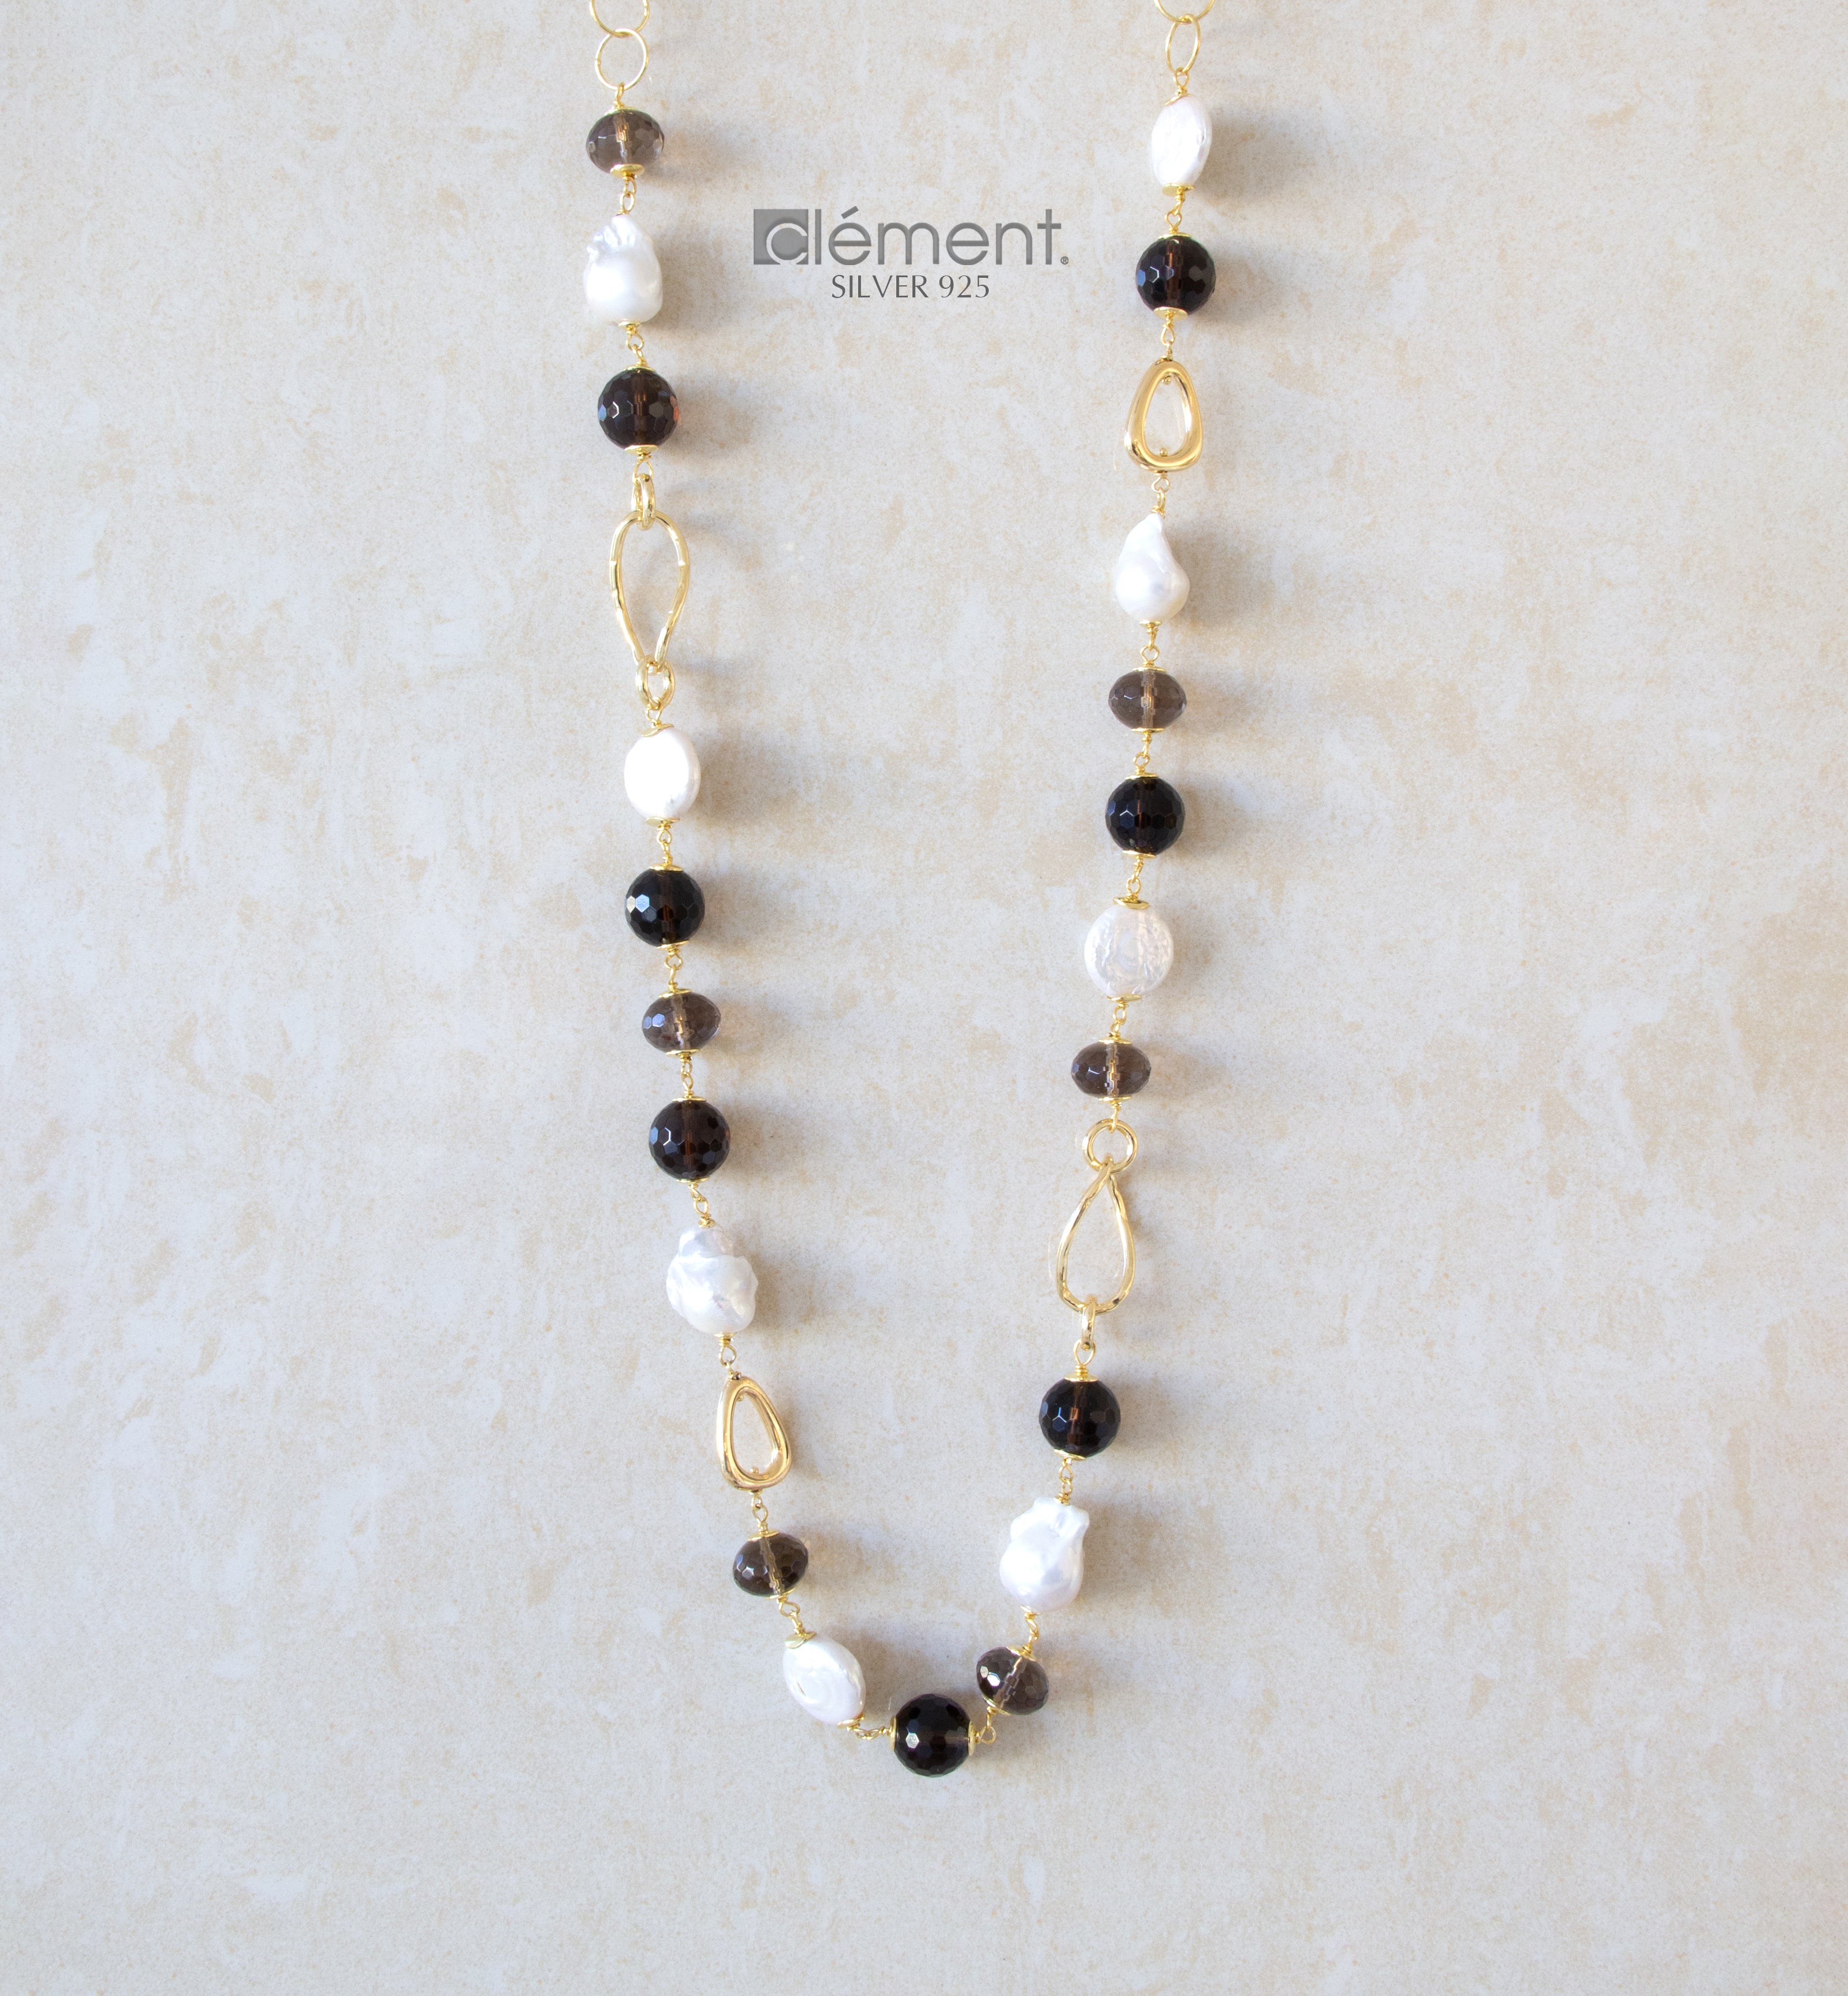 Silver 925 Long Necklace with Semi-Precious Stones and Pearls